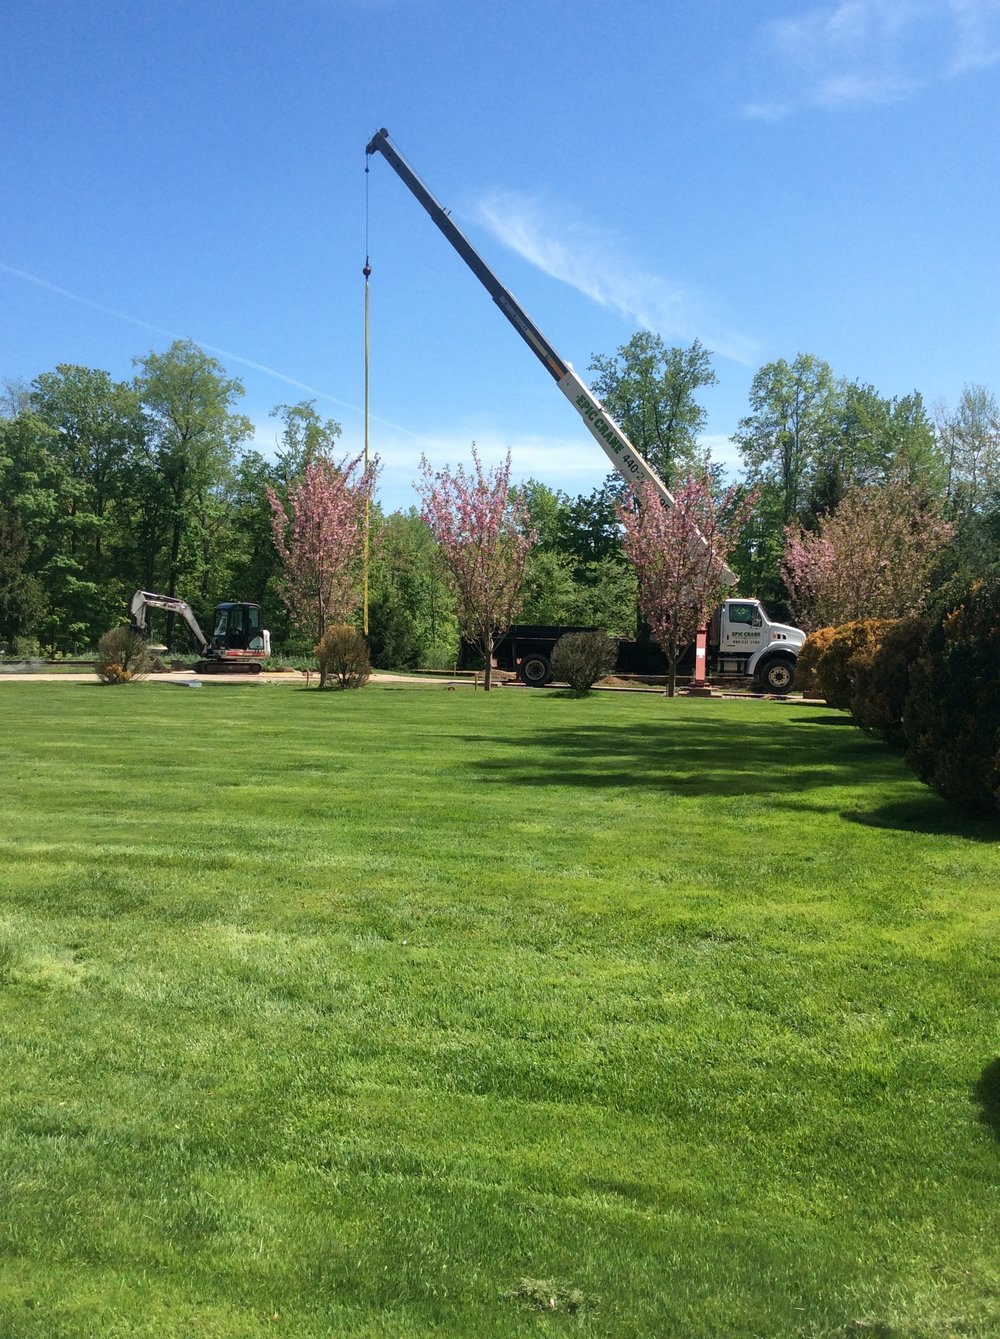 Top lawn care and snow removal in Moreland Hills, OH